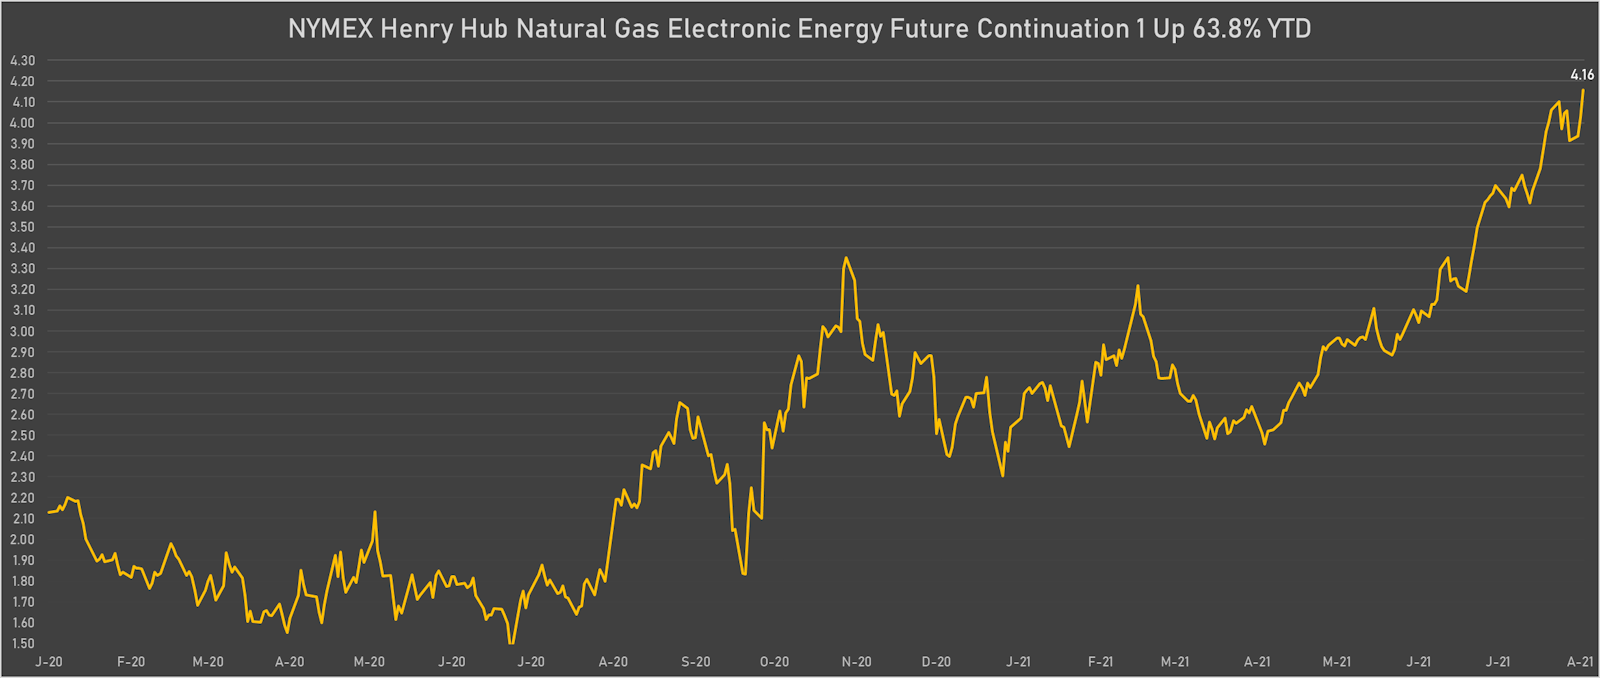 Natural Gas Front-Month Futures prices Up 64% This Year | Sources: ϕpost, Refinitiv data